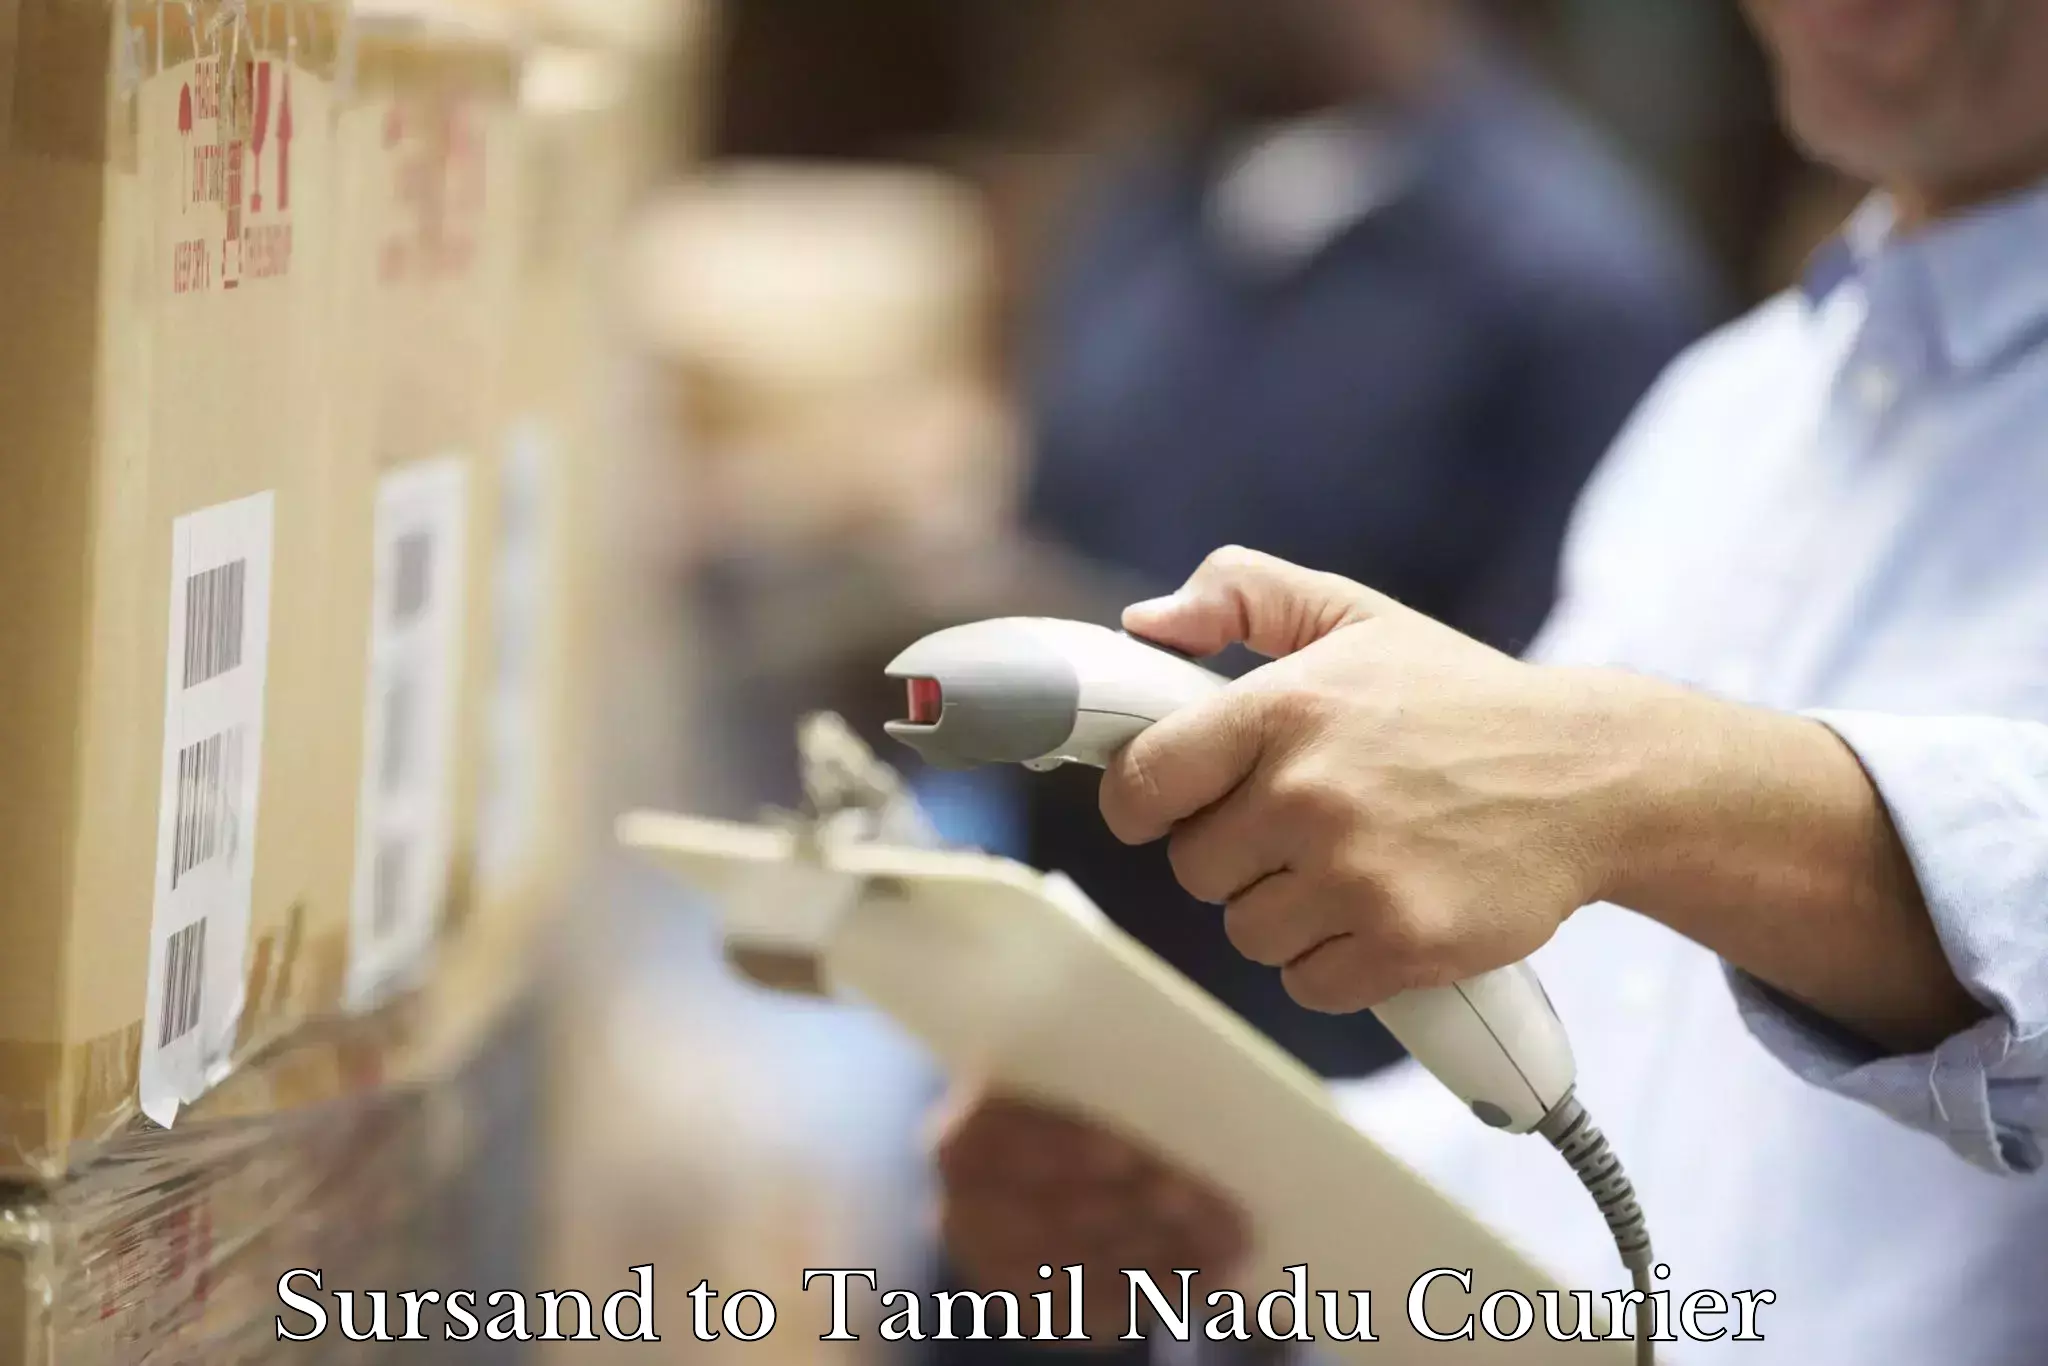 Package delivery network Sursand to Tamil Nadu